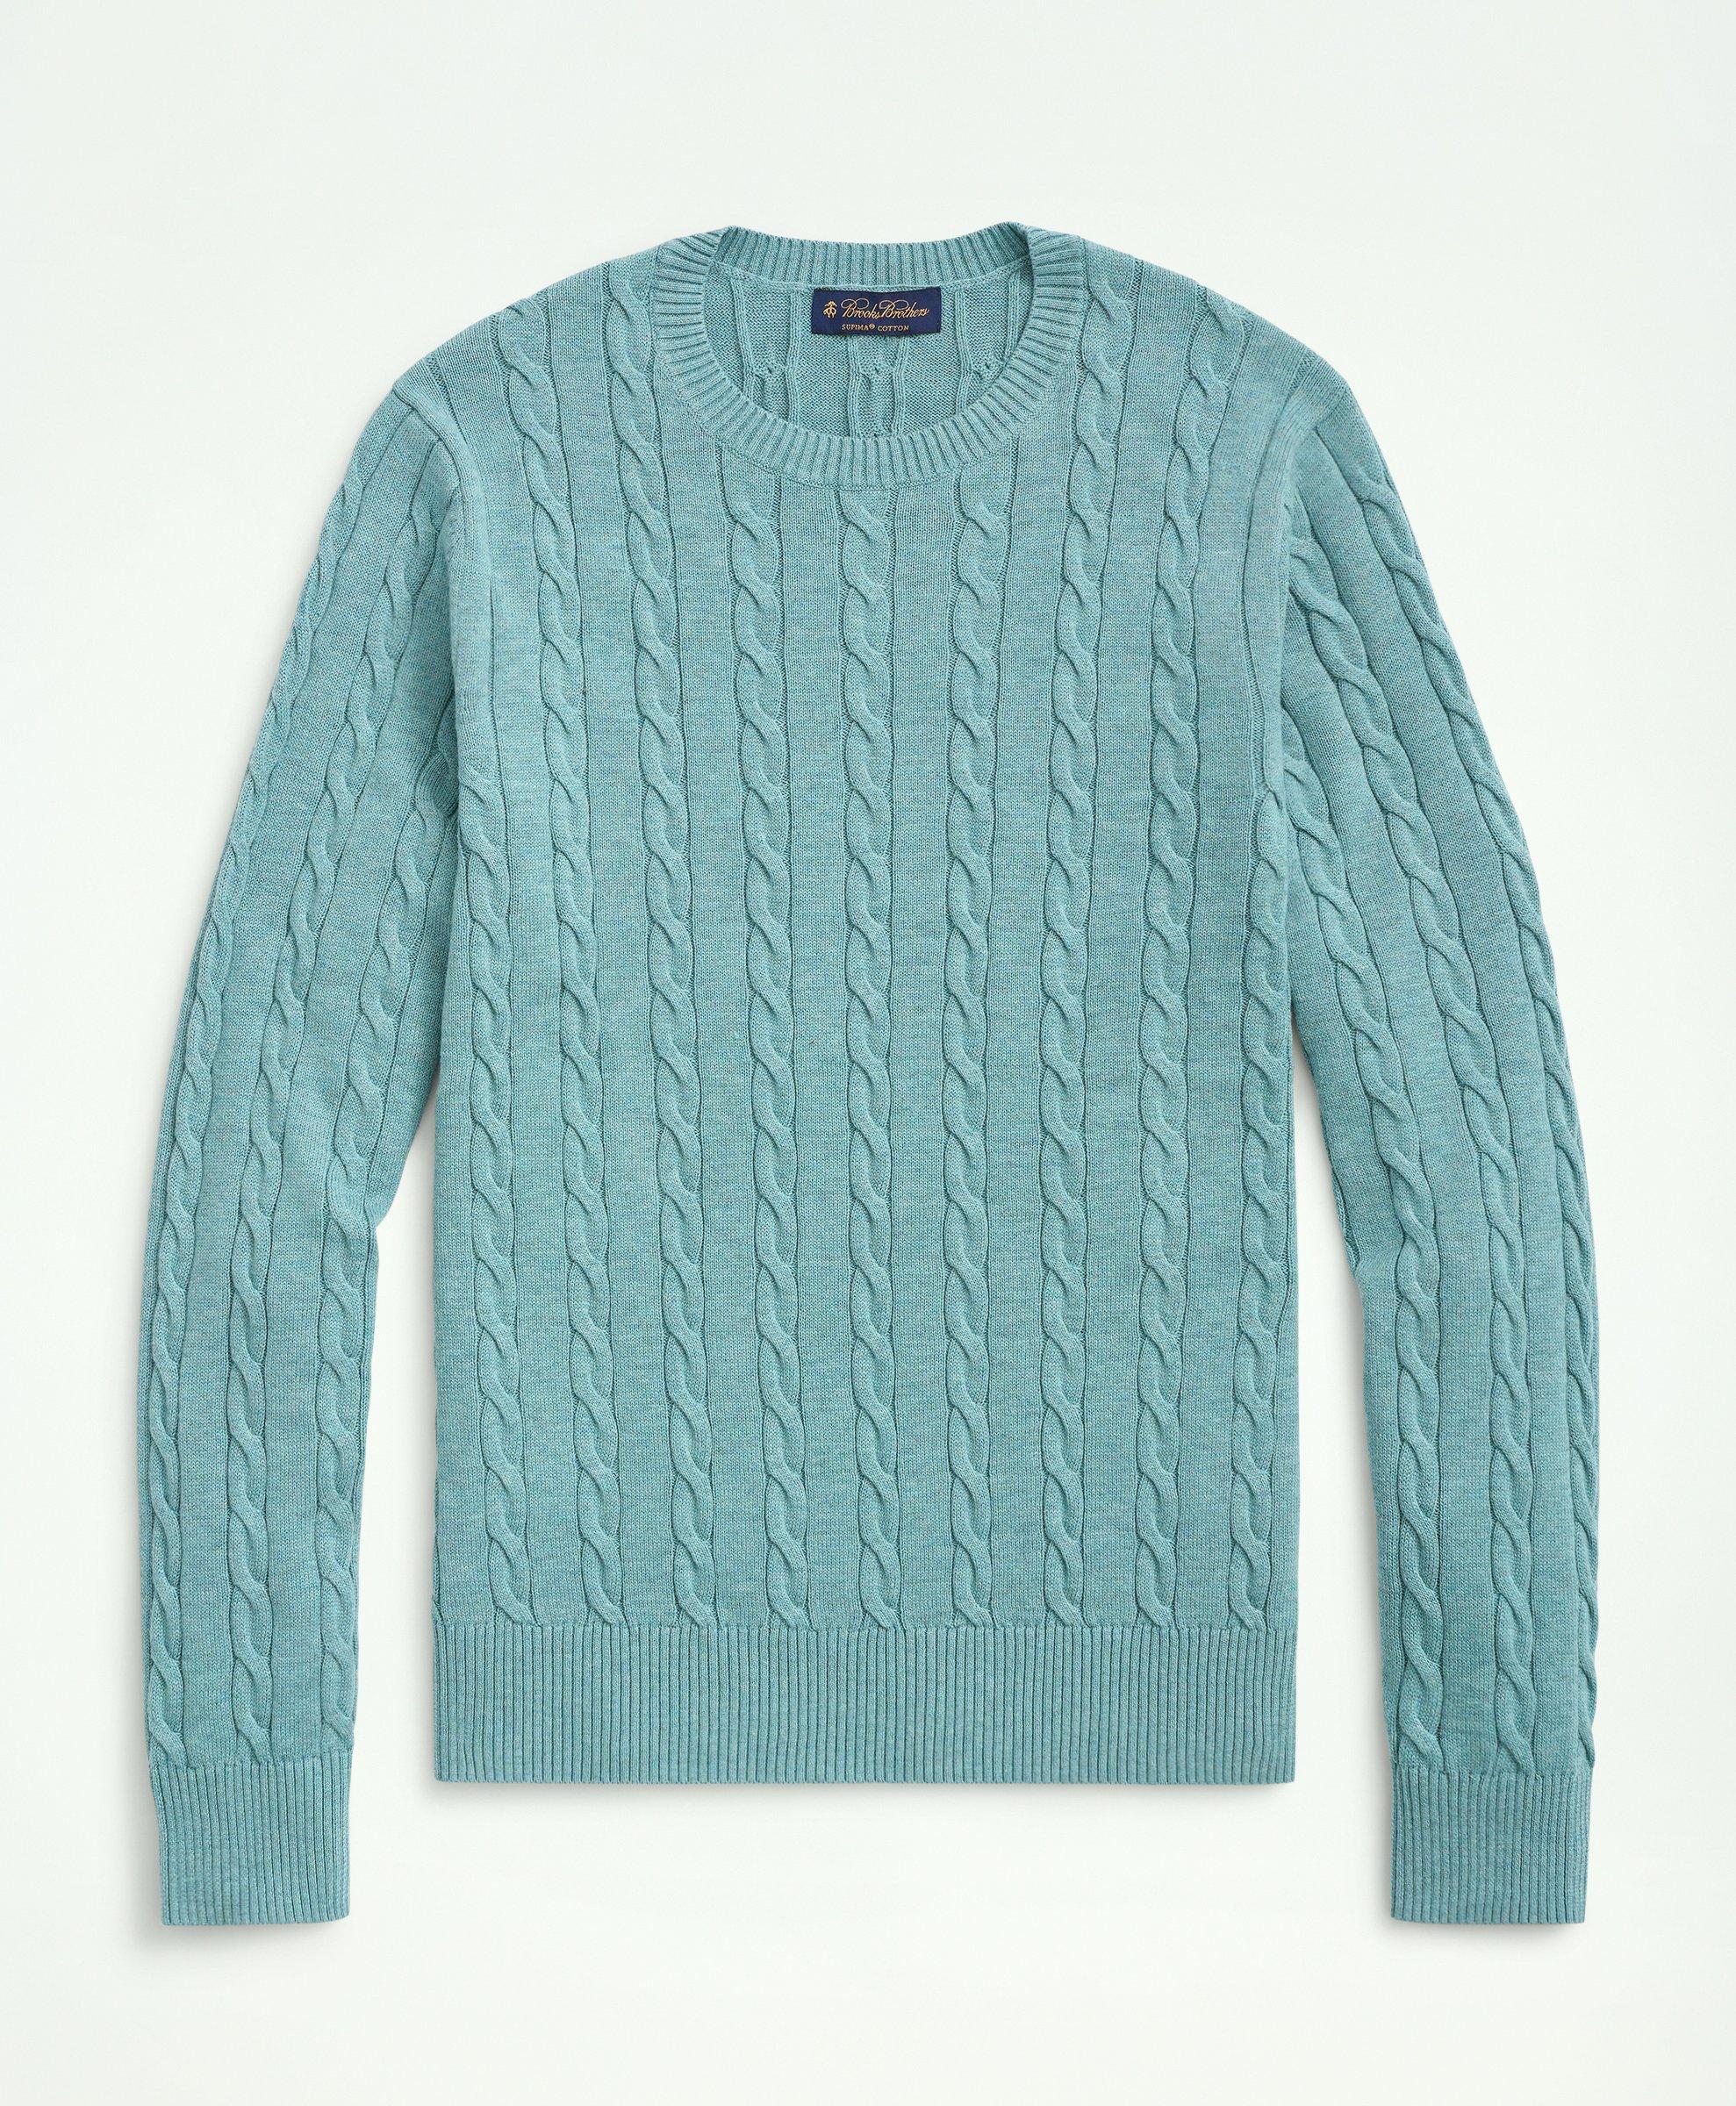 Brooks Brothers Supima Cotton Cable Crewneck Sweater | Turquoise Heather | Size Small